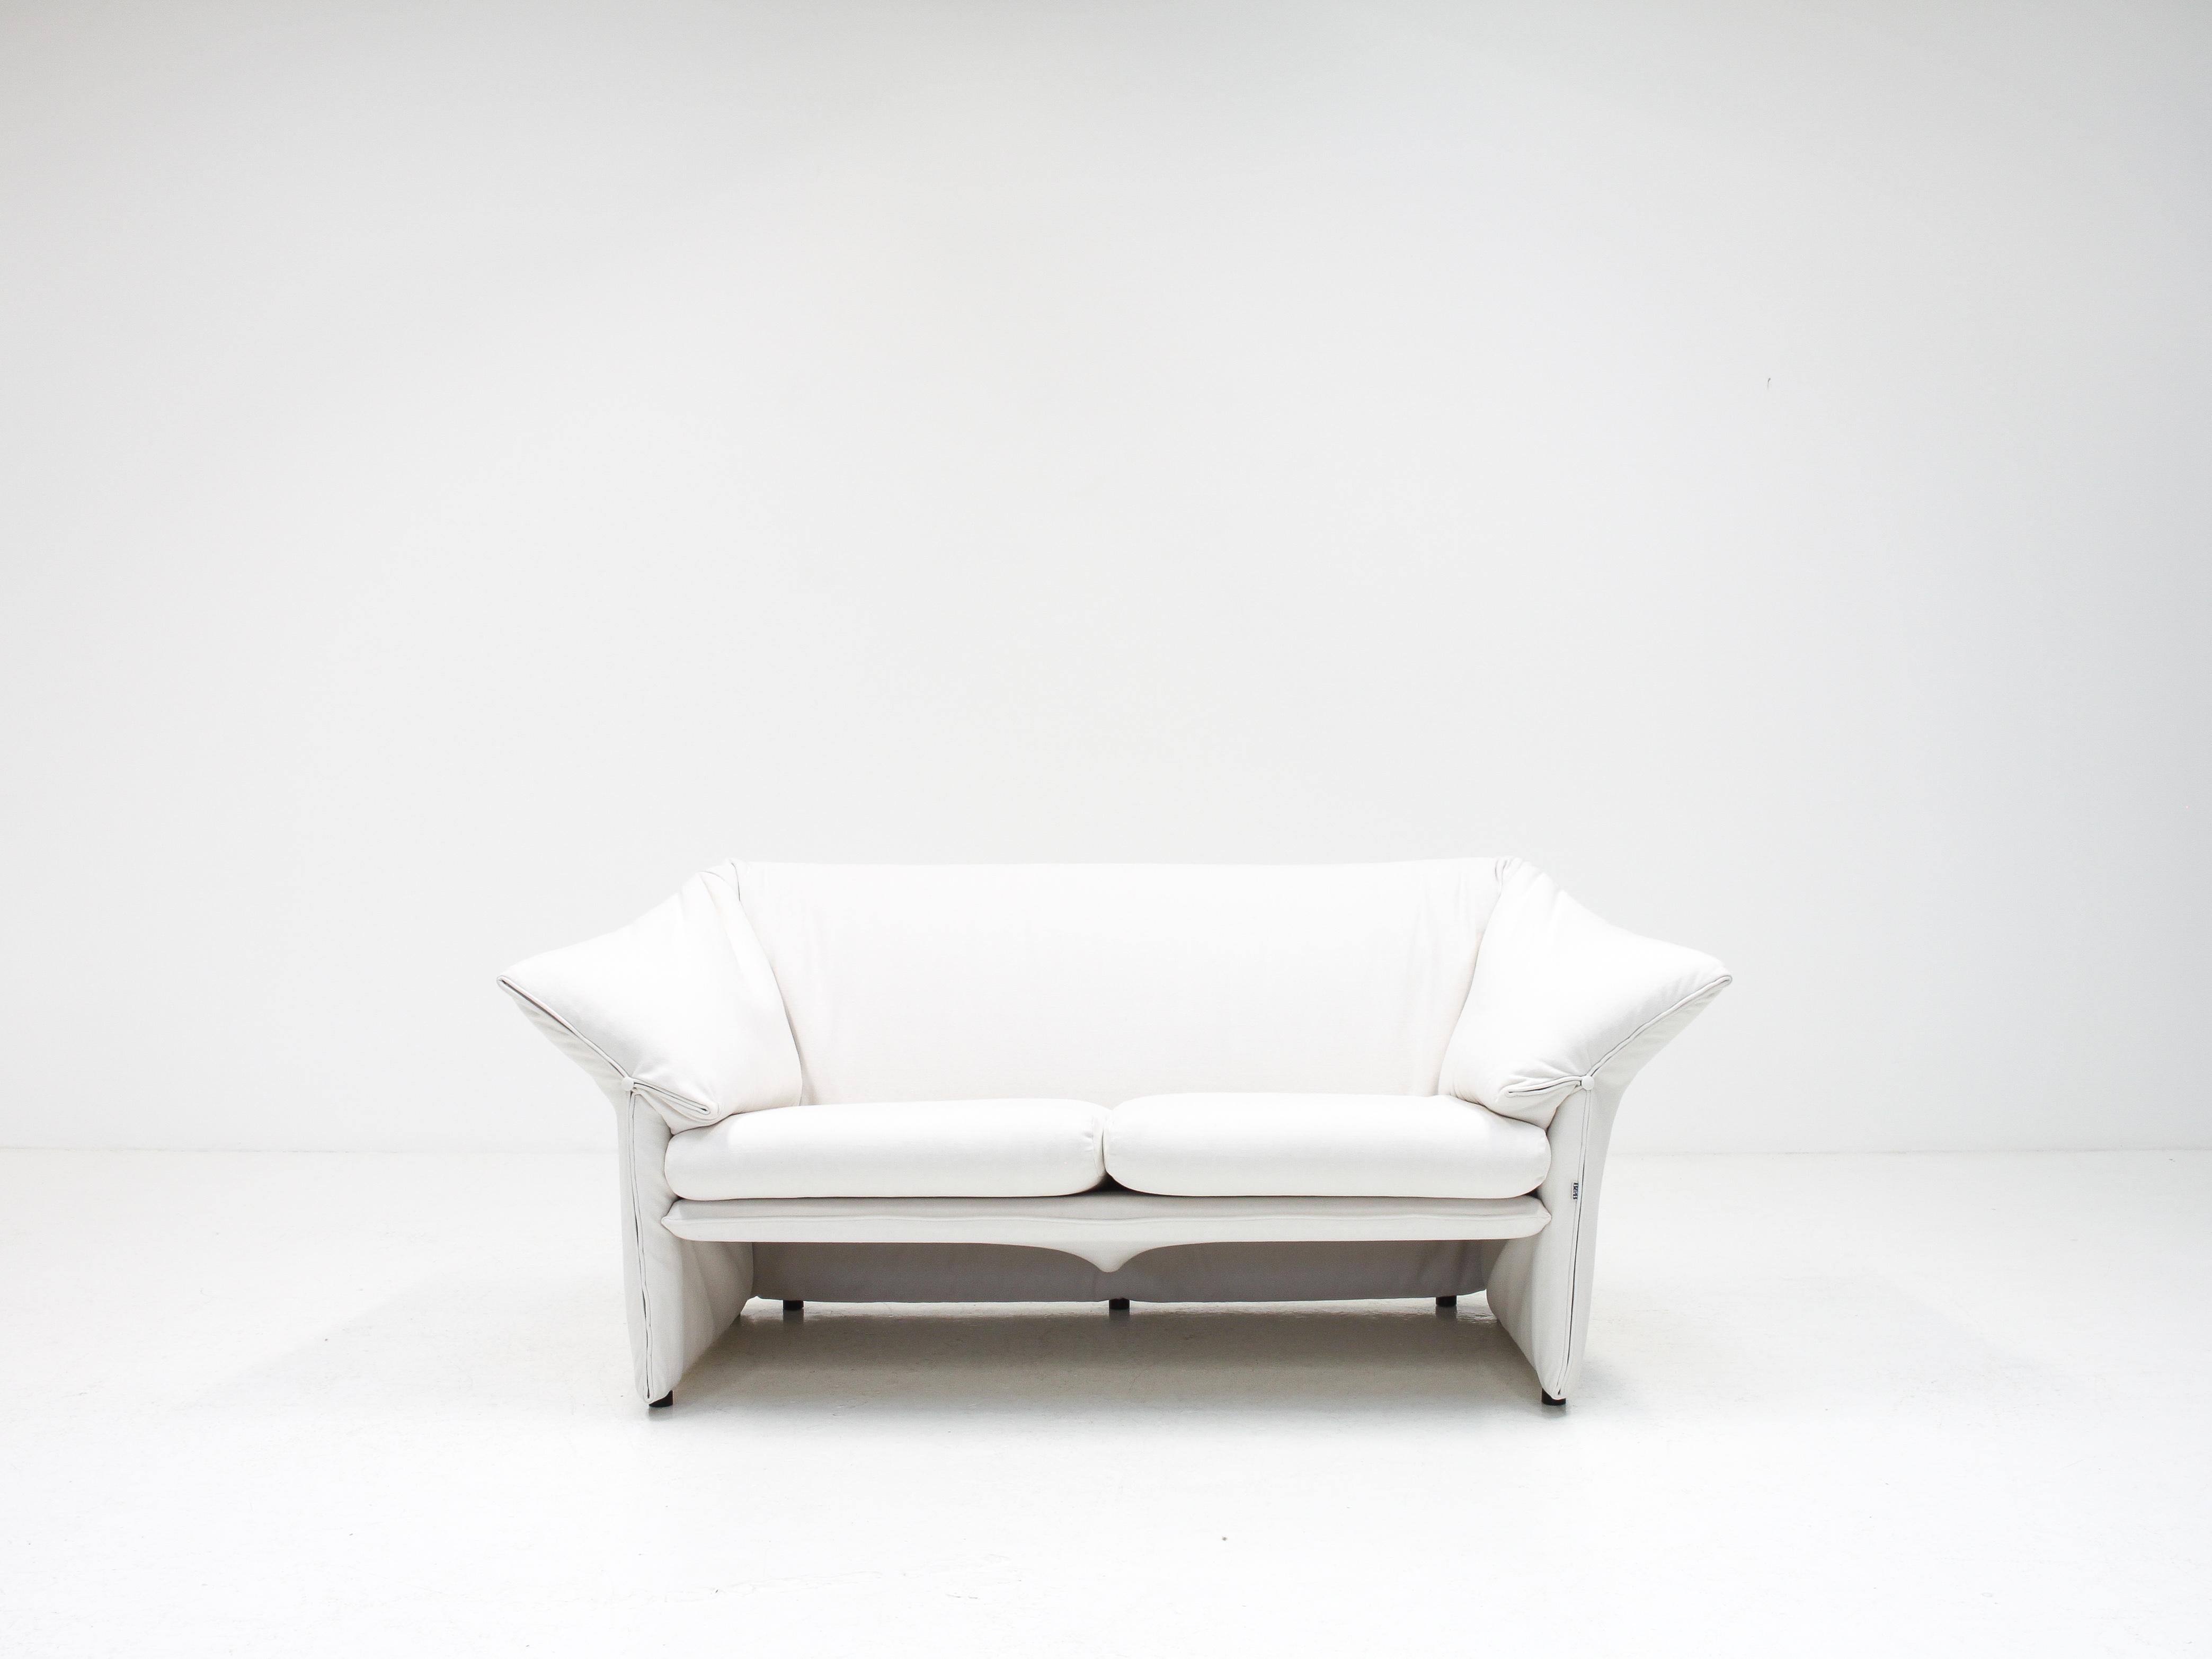  'Le Stelle' Loveseat Sofa by Mario Bellini for B&B Italia, 1974, Reupholstered 5